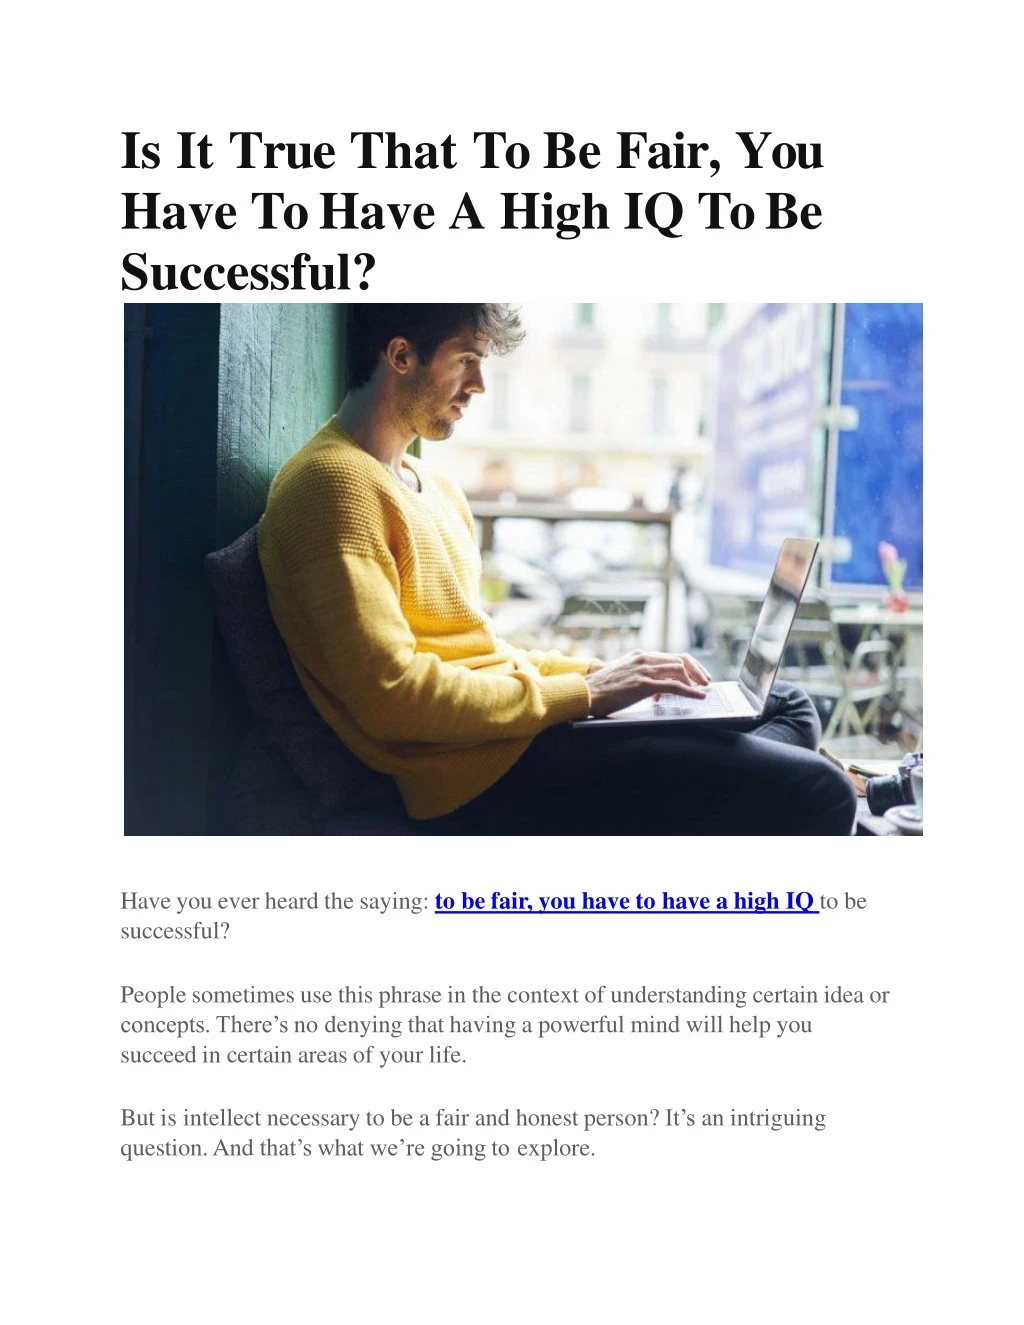 is it true that to be fair you have to have a high iq to be successful